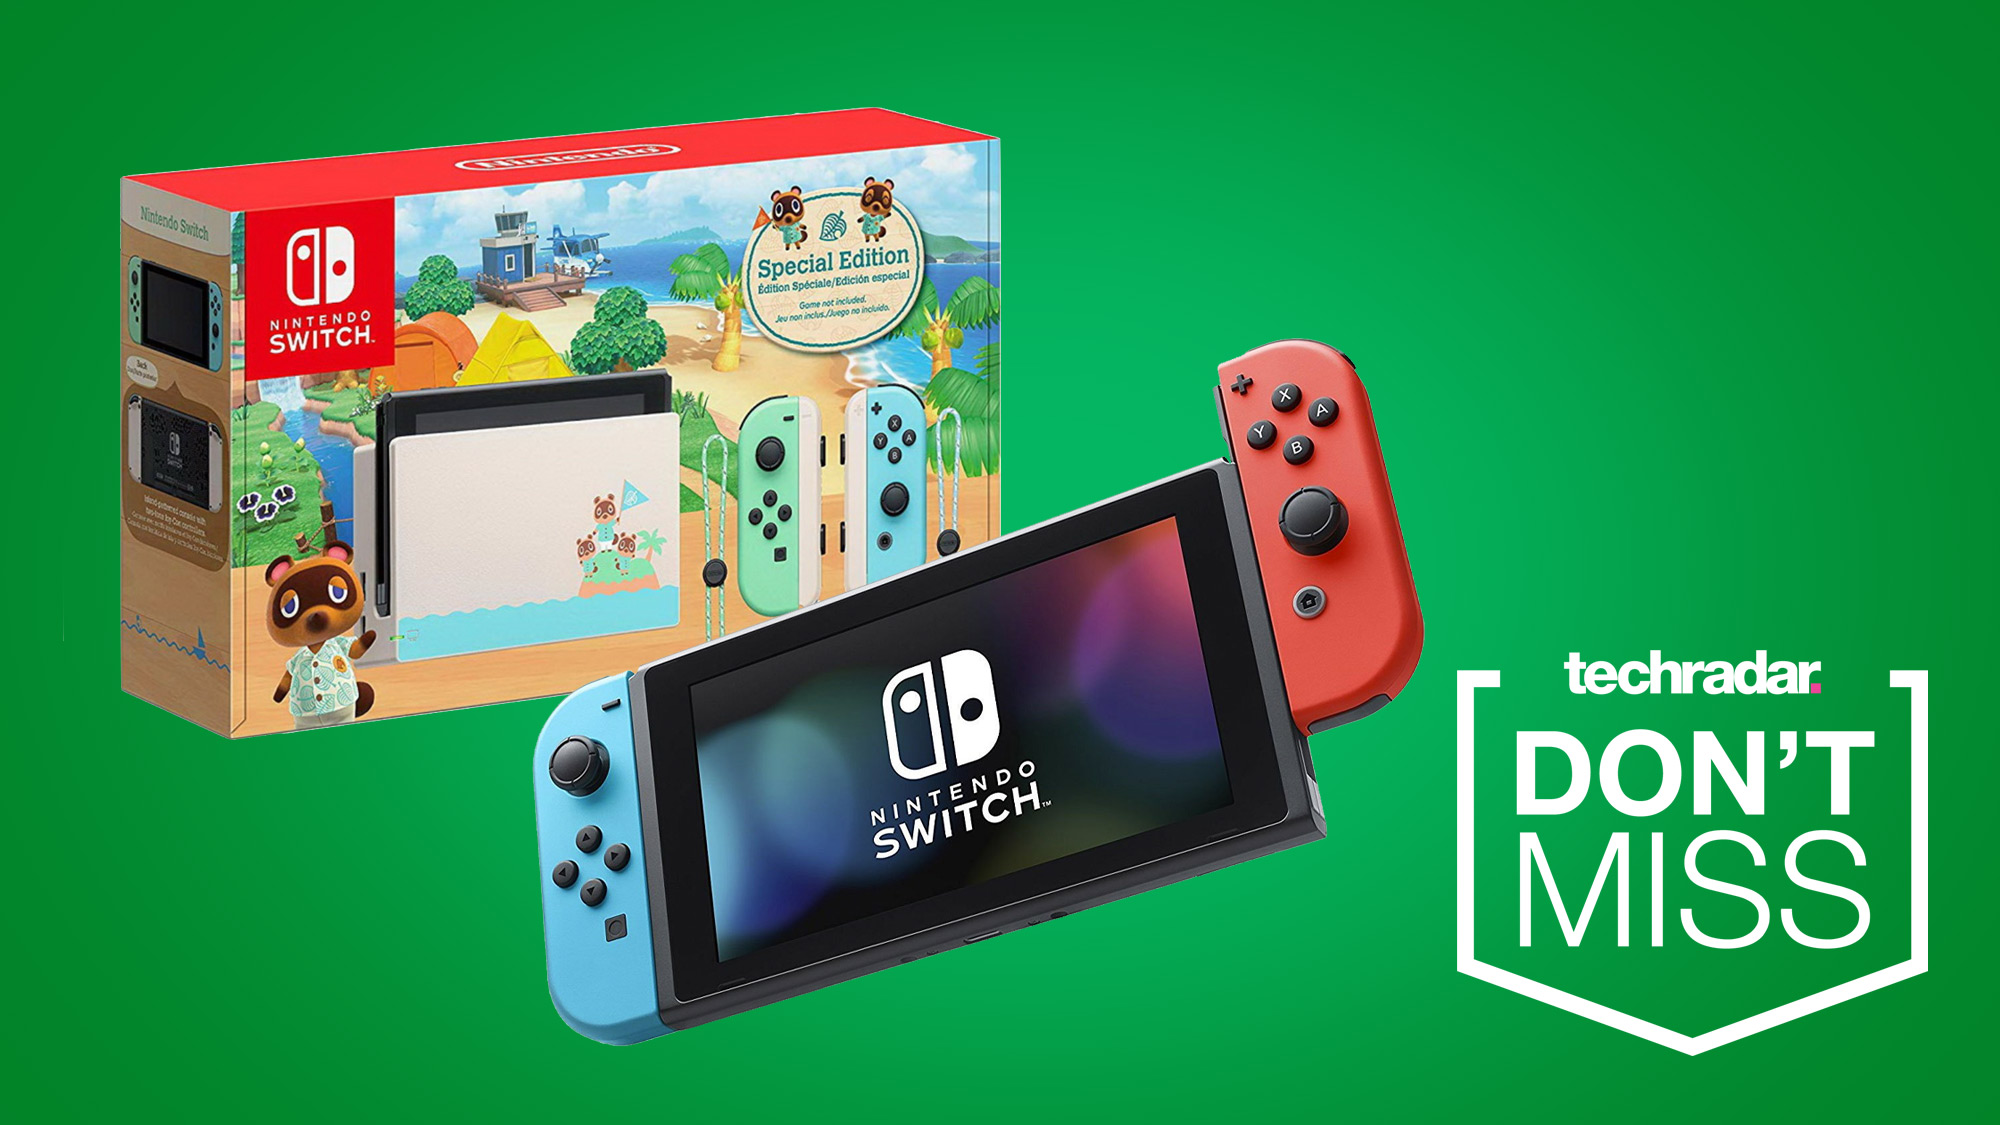 animal crossing new horizons and switch bundle